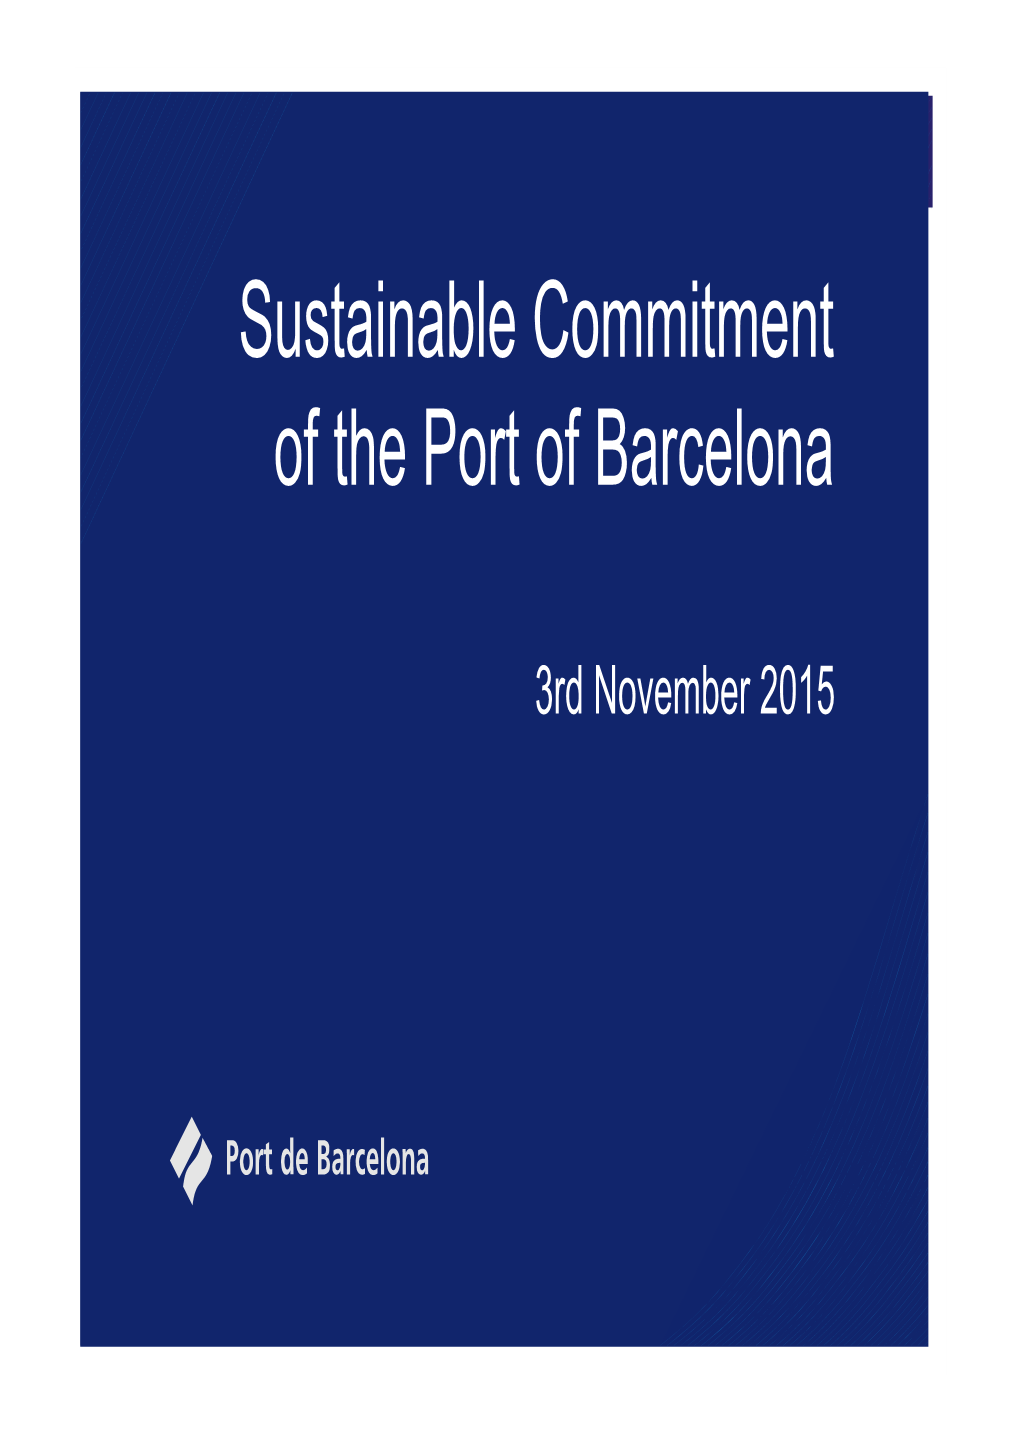 Sustainable Commitment of the Port of Barcelona